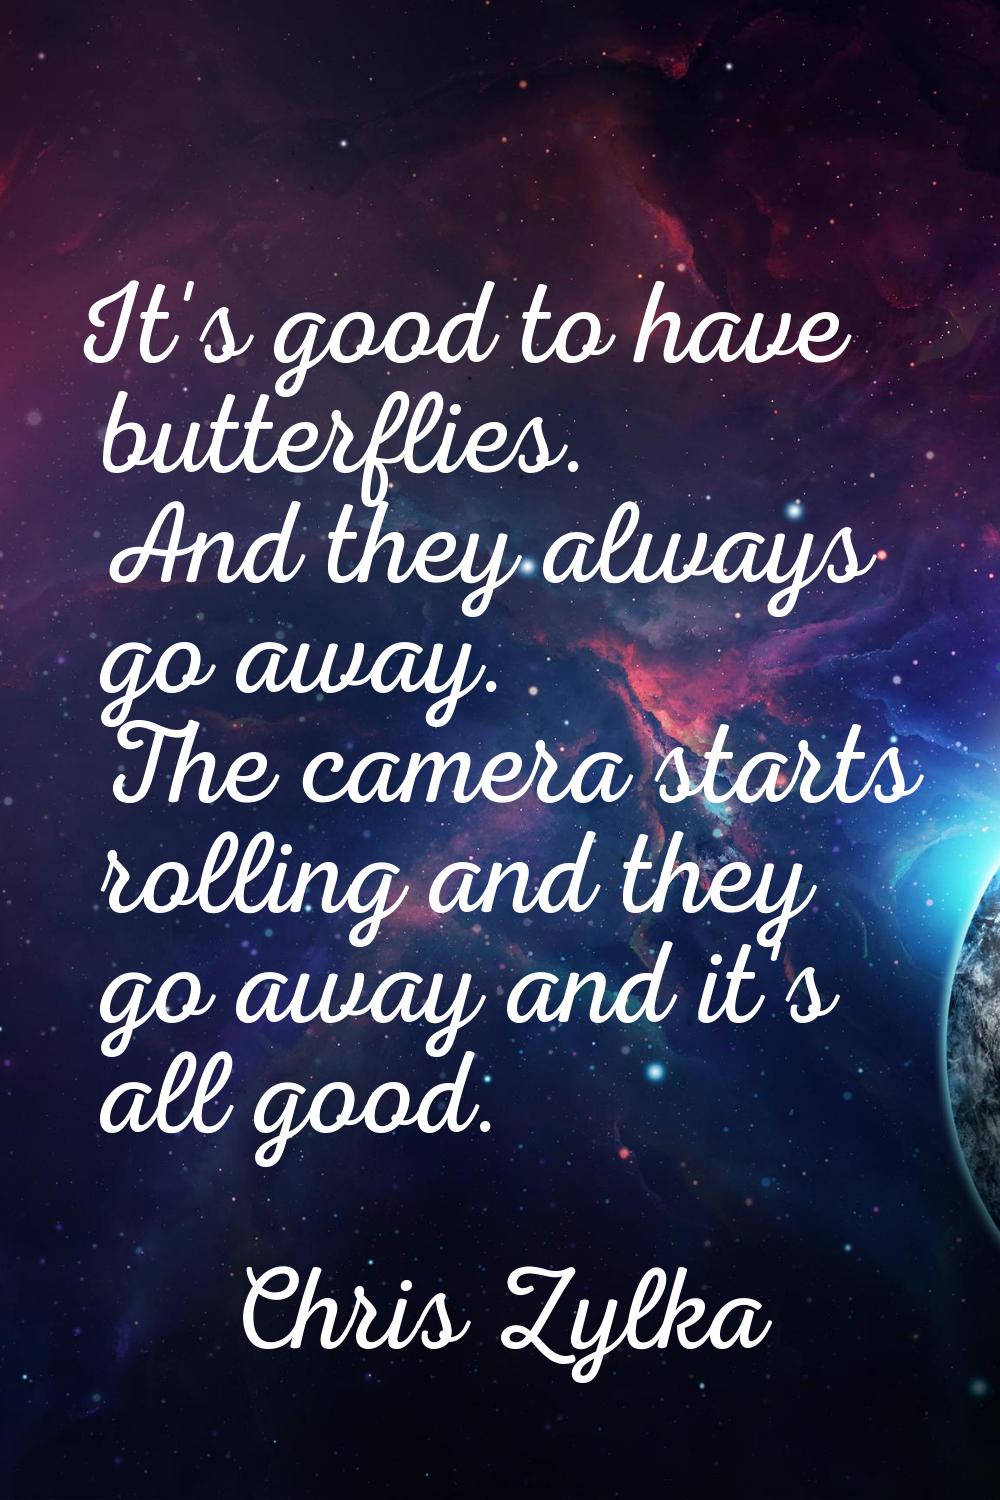 It's good to have butterflies. And they always go away. The camera starts rolling and they go away 